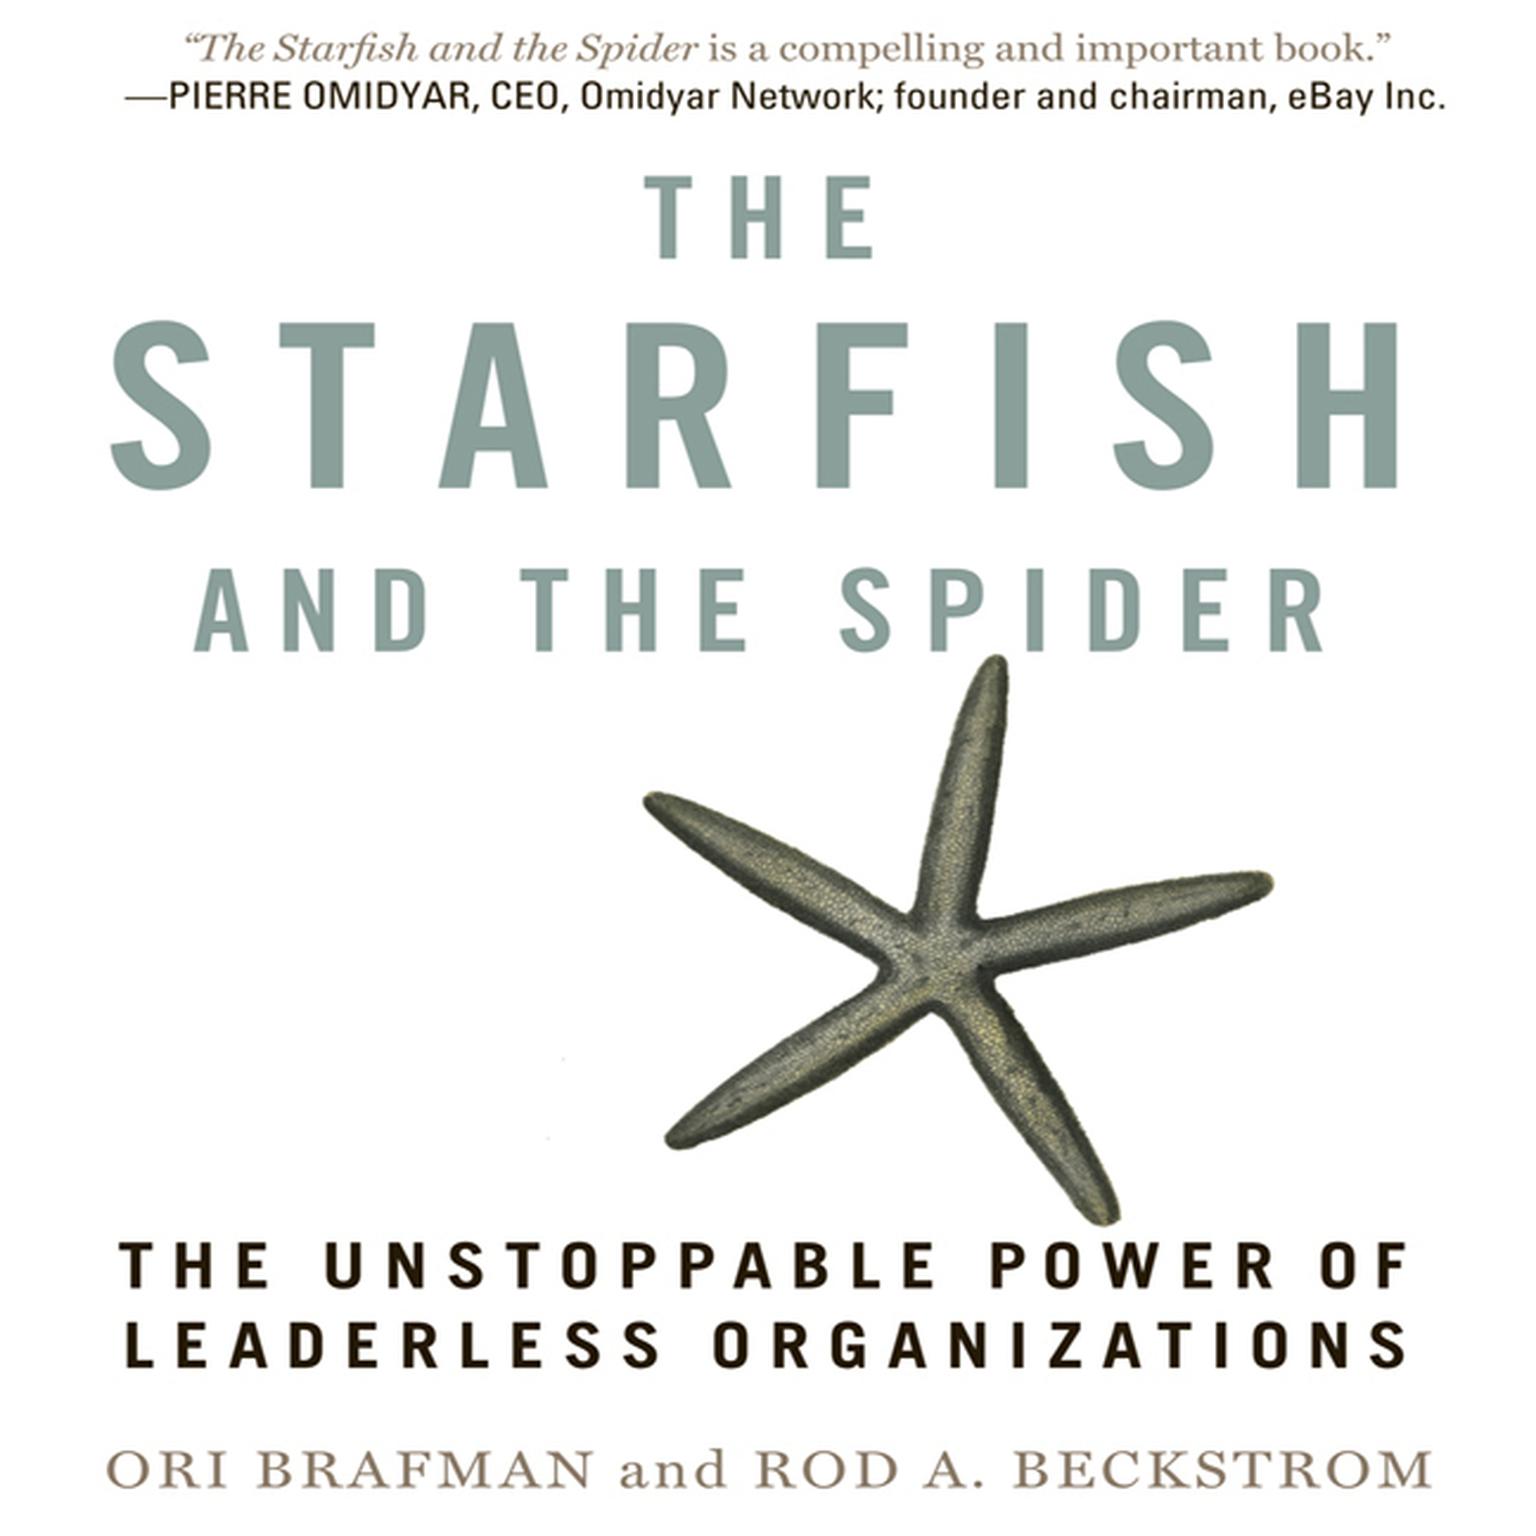 The Starfish and the Spider: The Unstoppable Power of Leaderless Organizations Audiobook, by Ori Brafman